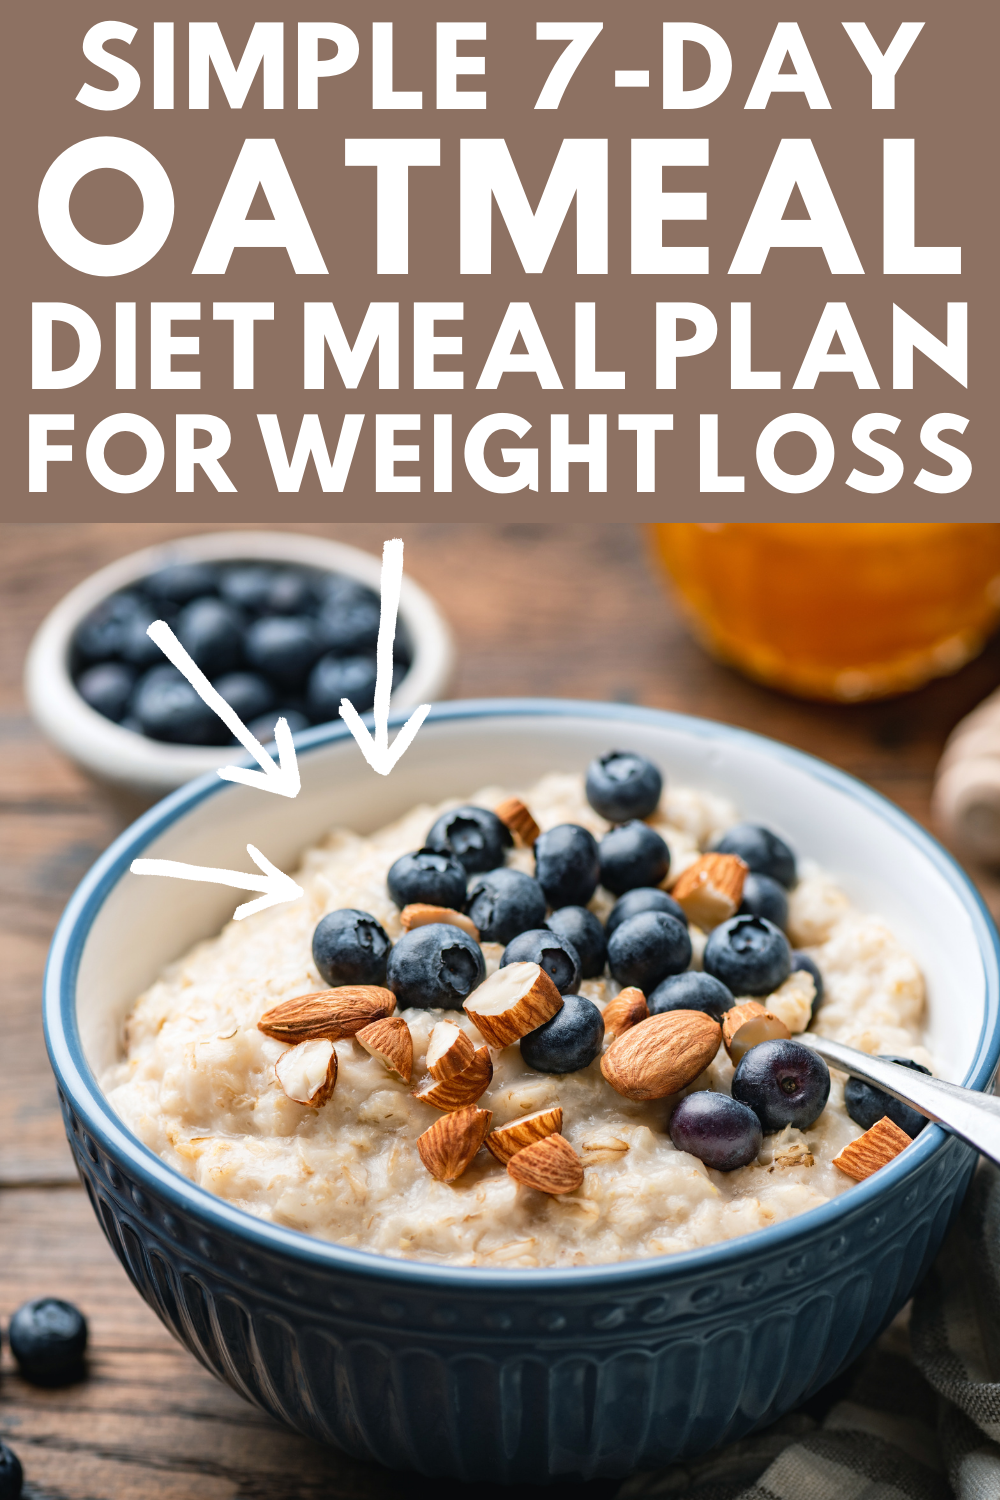 7-Day Oatmeal Diet Meal Plan for Weight Loss